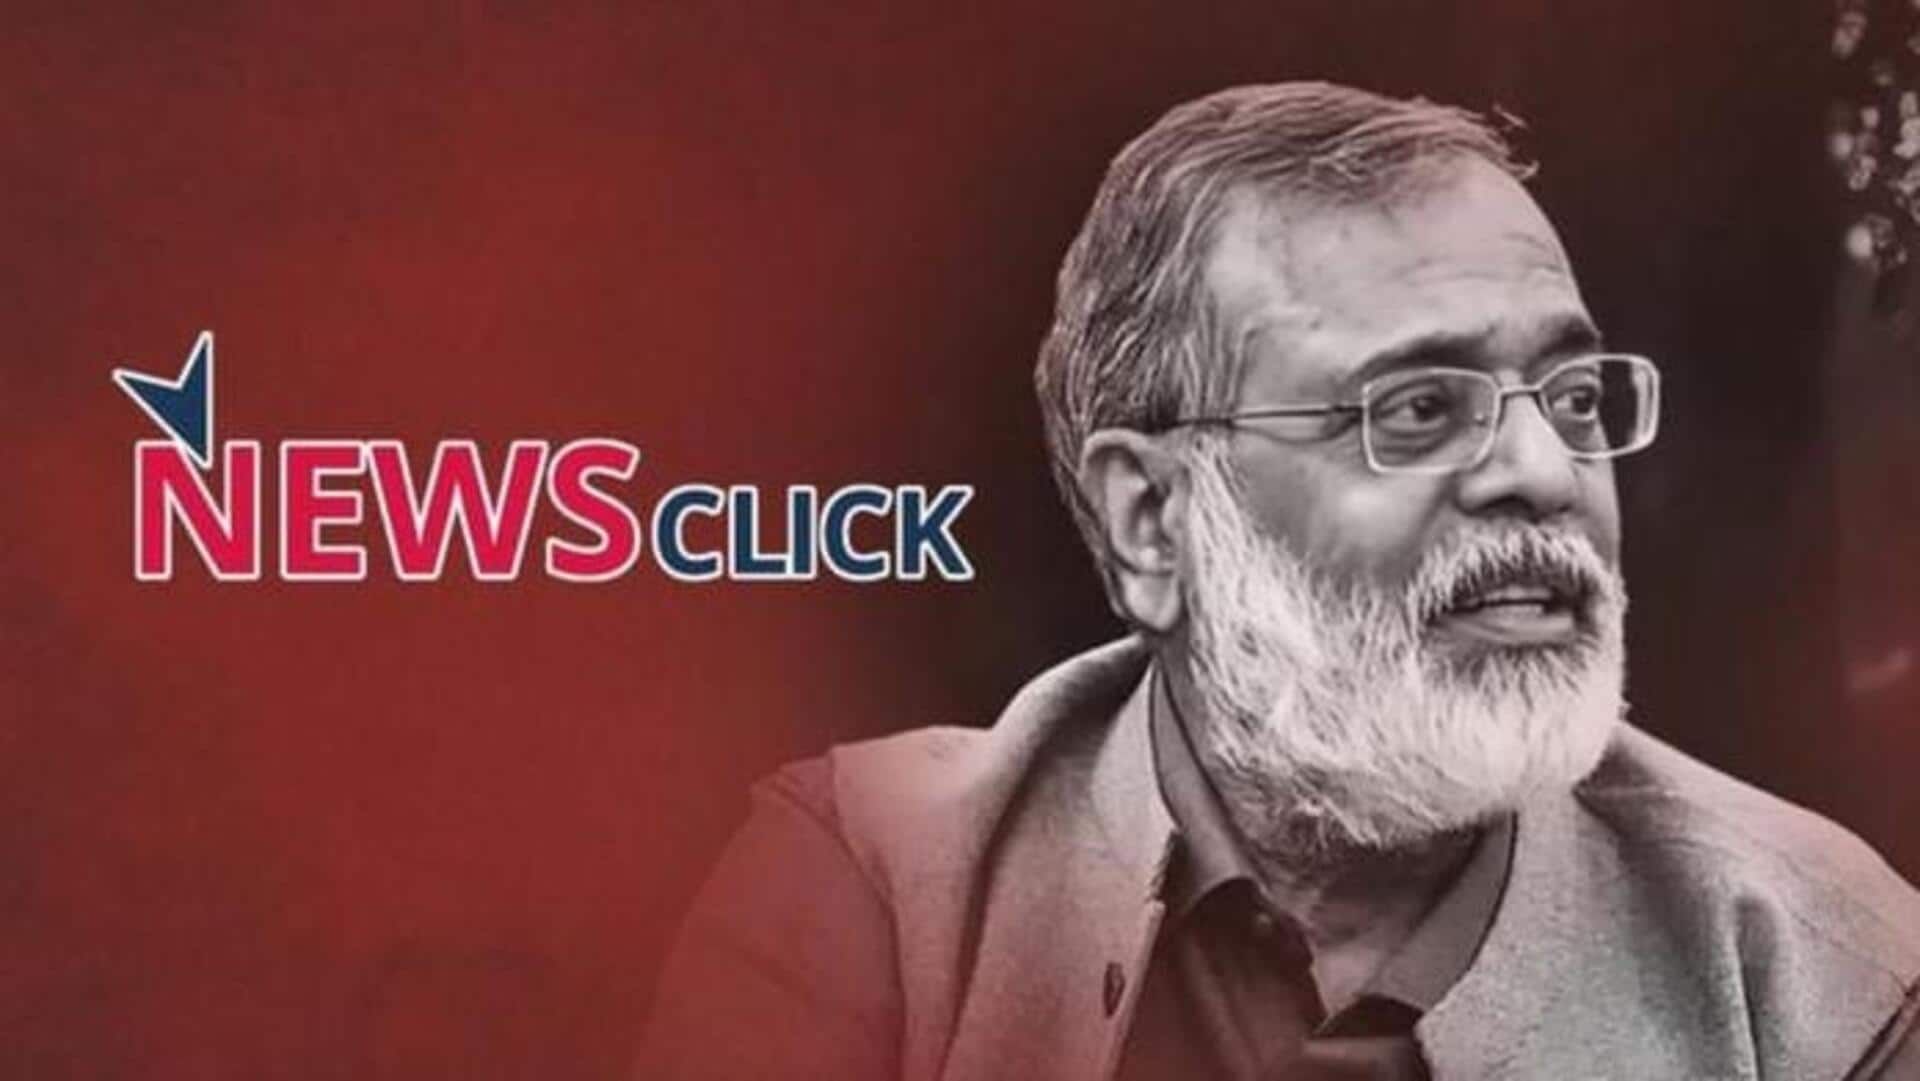 SC to hear bail hearing of NewsClick founder on Thursday